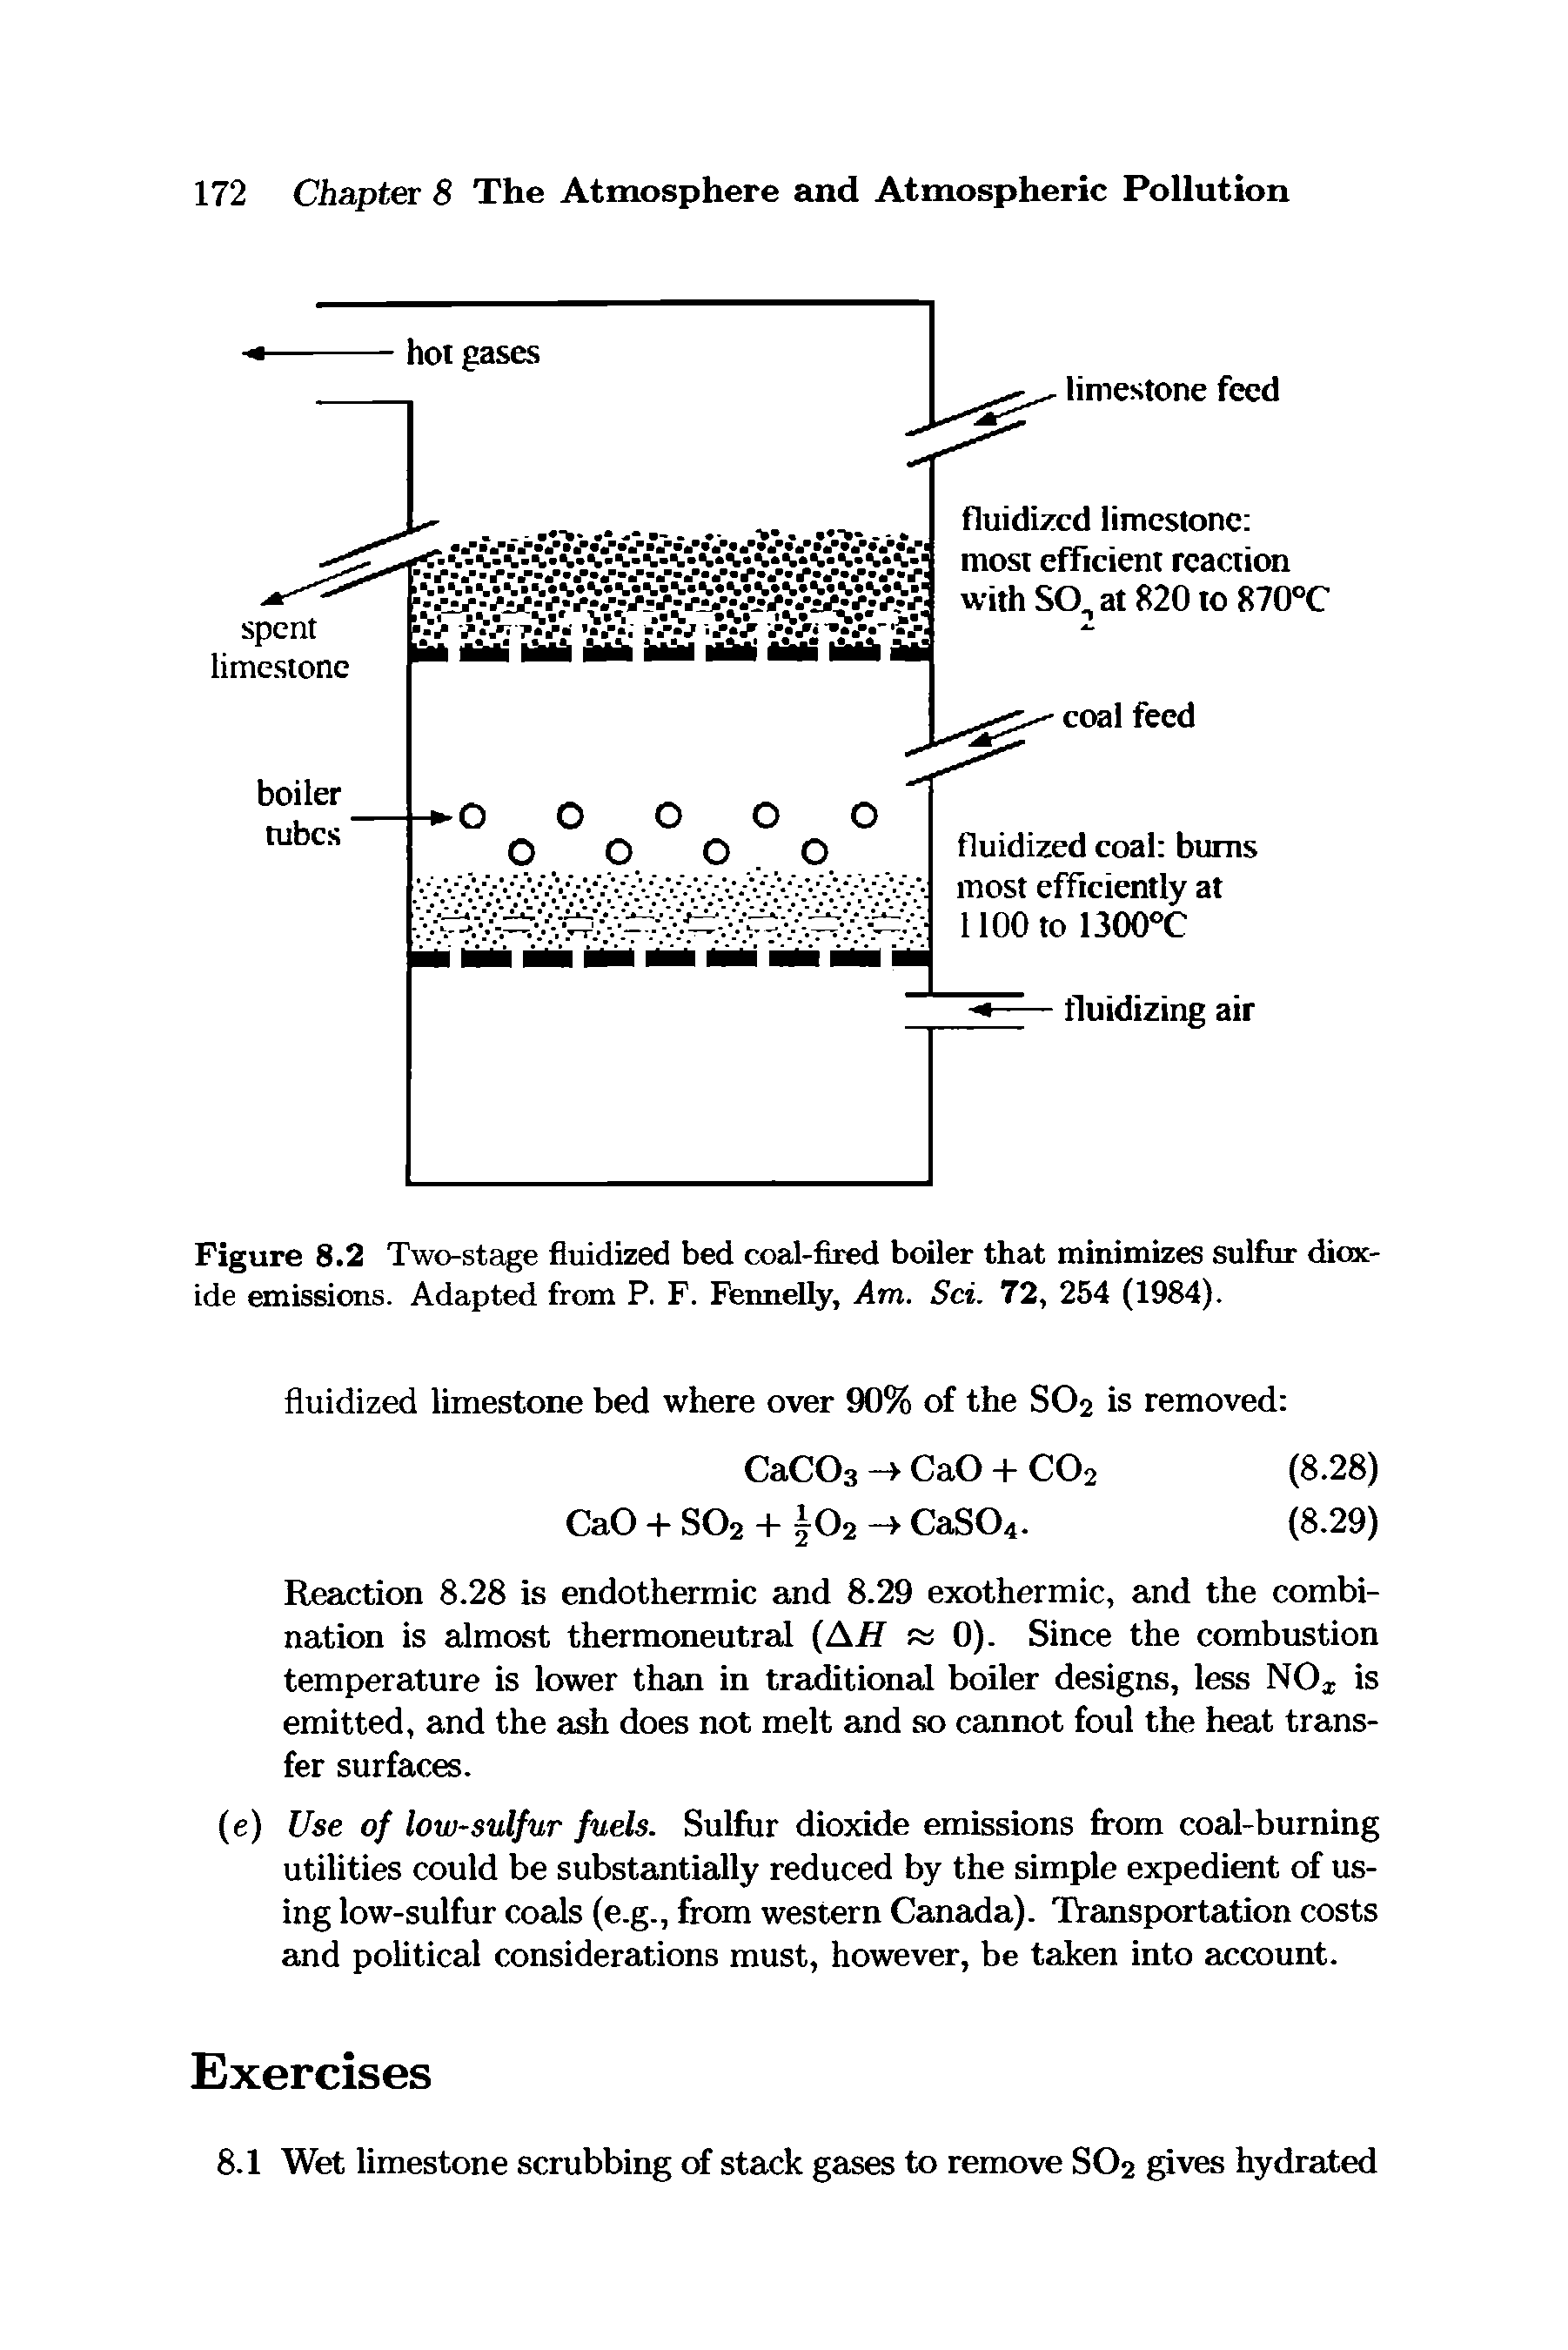 Figure 8.2 Two-stage fluidized bed coal-fired boiler that minimizes sulfur dioxide emissions. Adapted from P. F. Fennelly, Am. Sci. 72, 254 (1984).